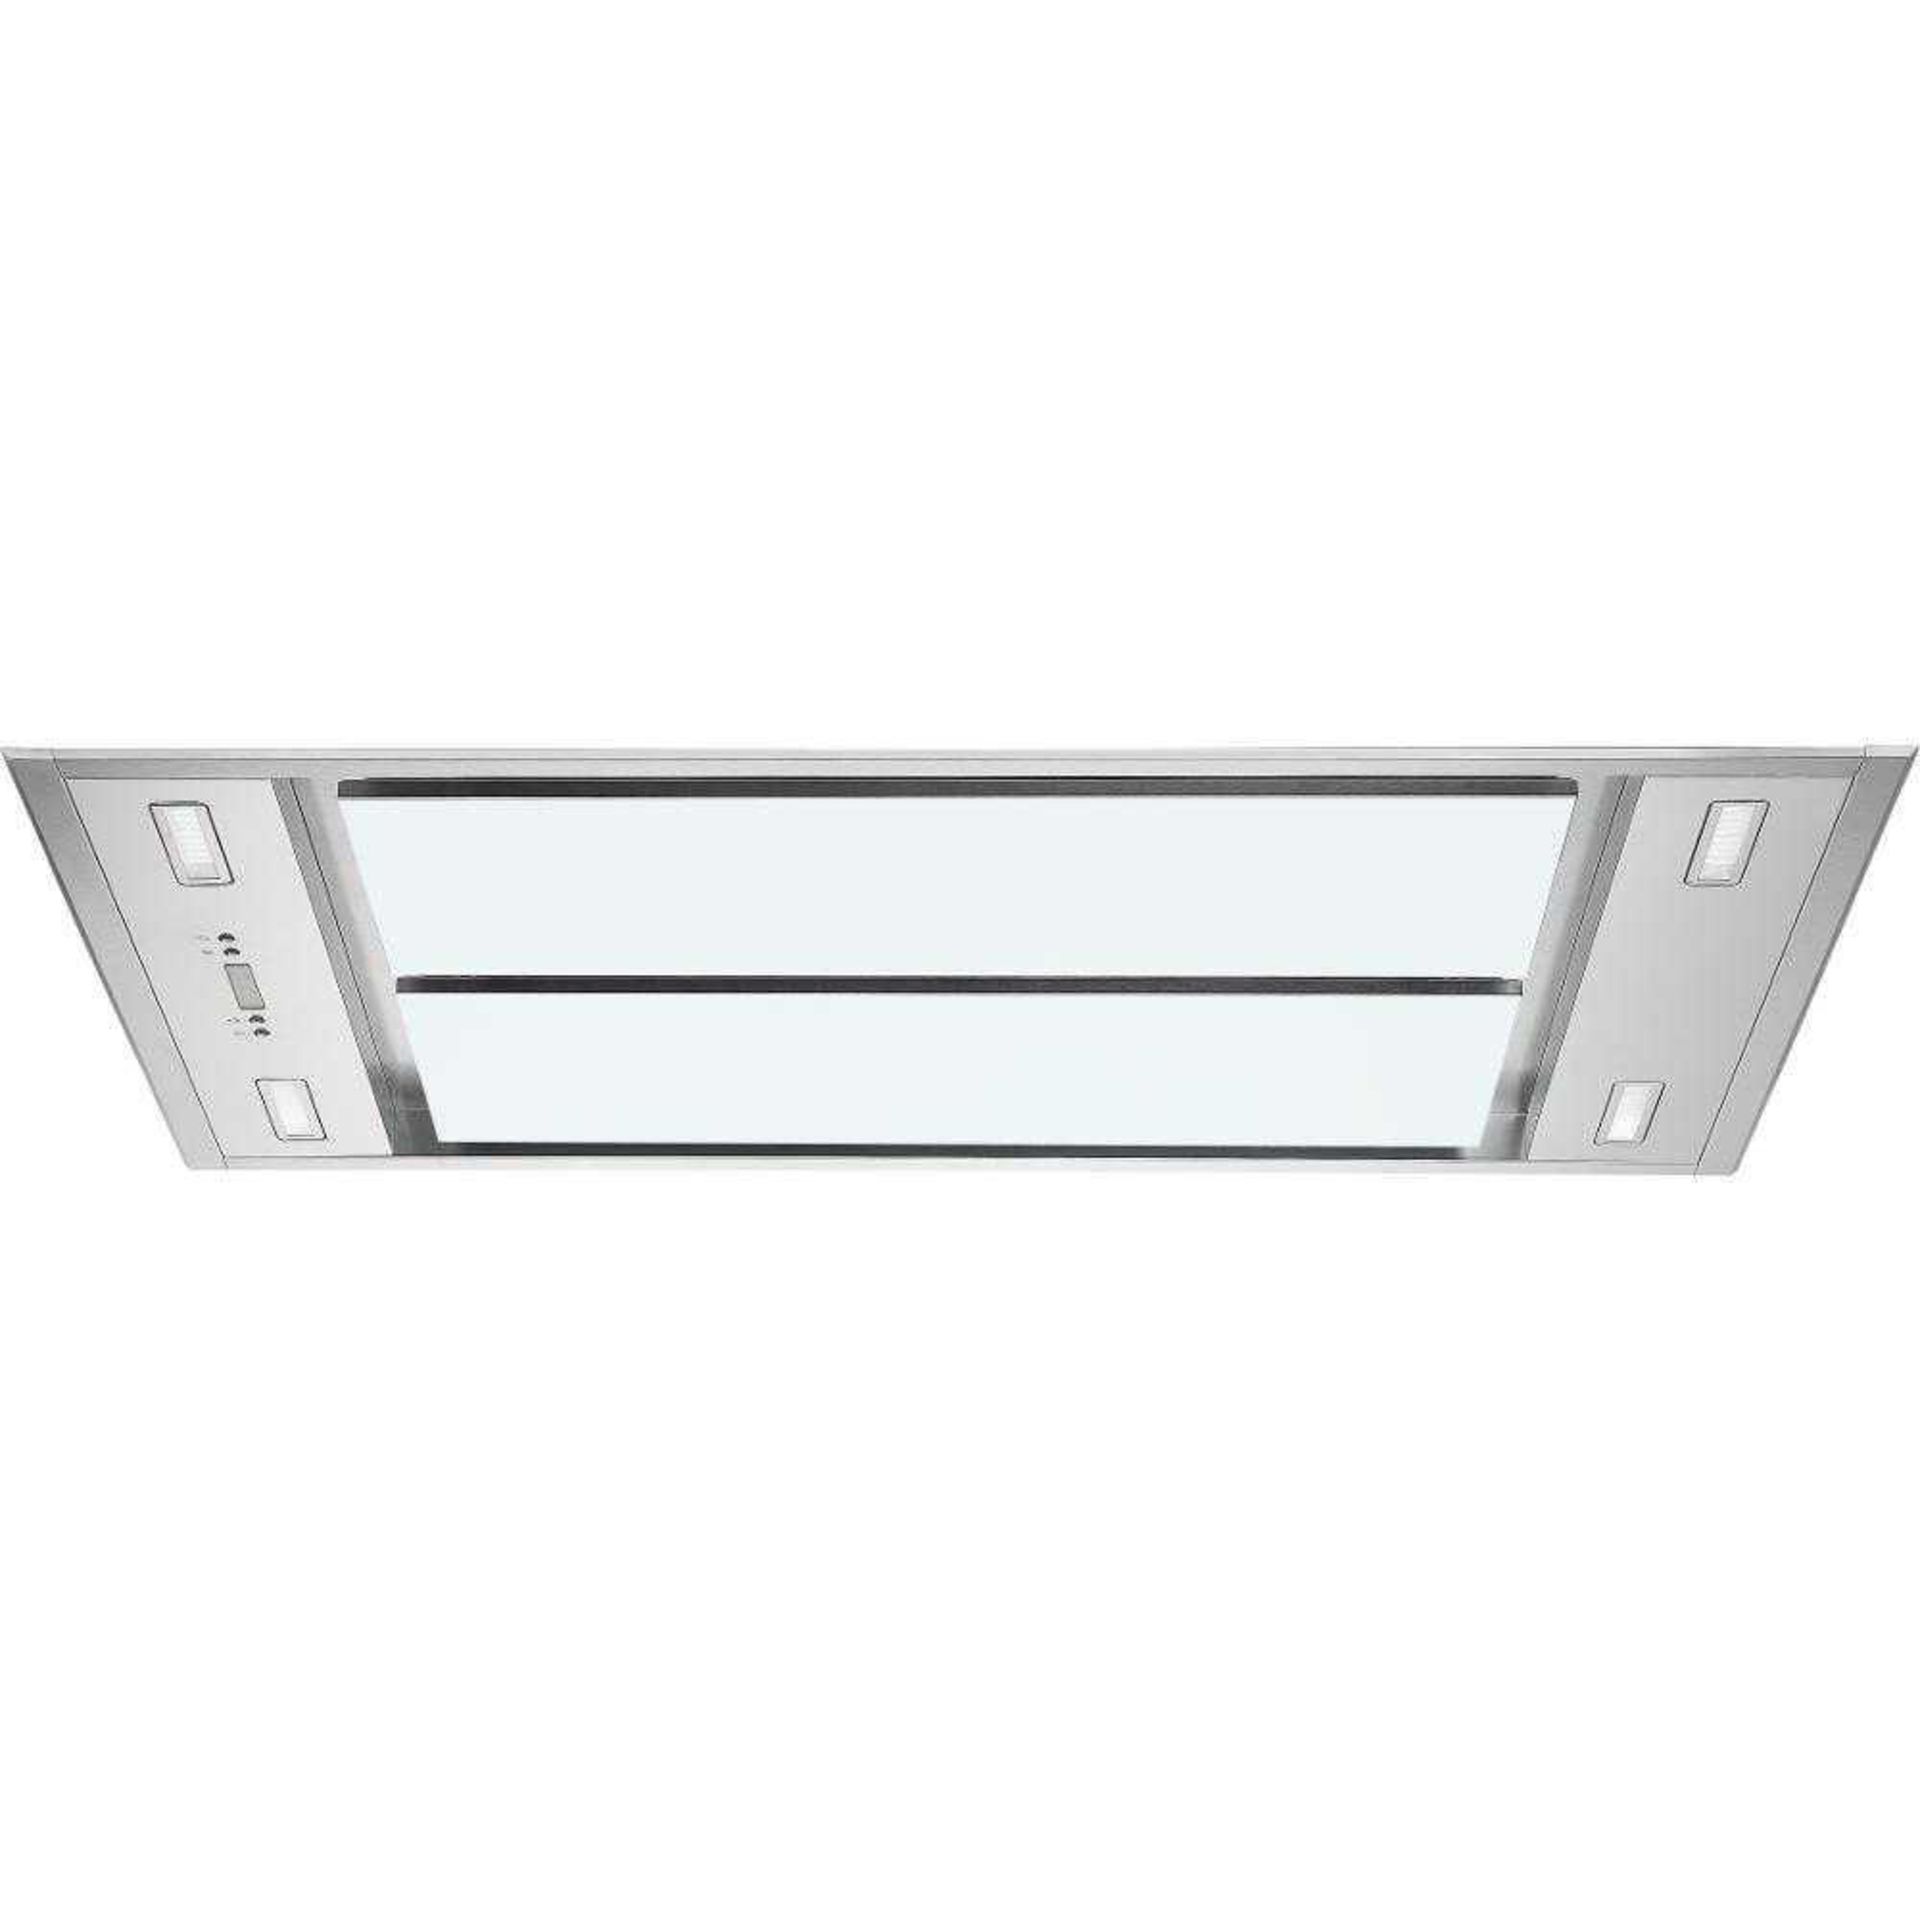 Rrp £400 Ceiling Extractor Fan - Image 2 of 2